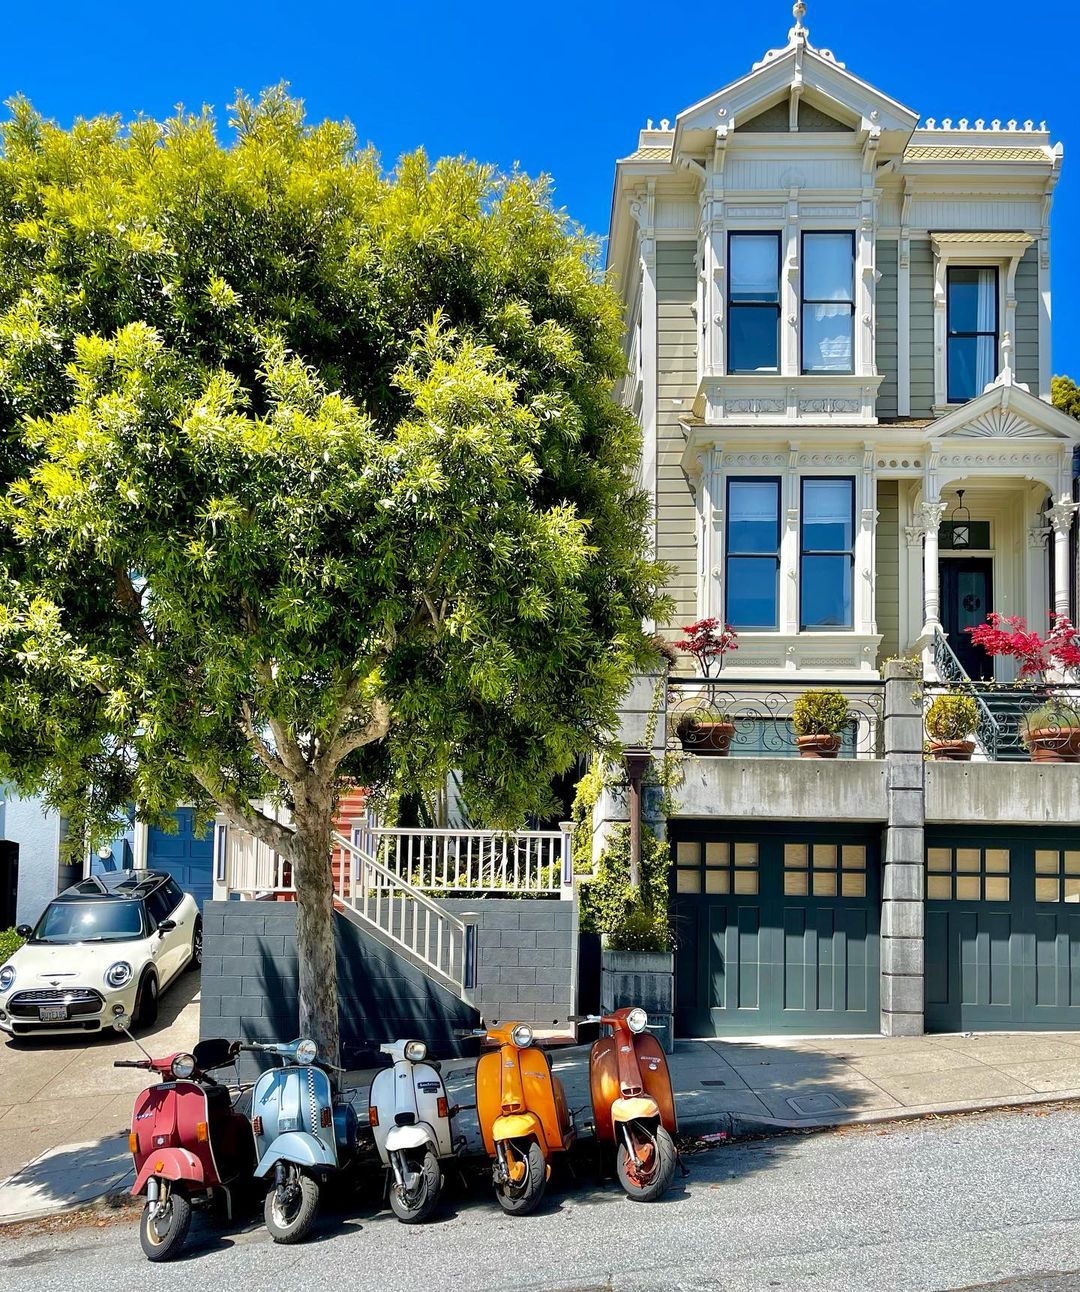 Scooters All Parked Outside an Apartment in San Francisco. Photo by Instagram user @allmyheartin.sf